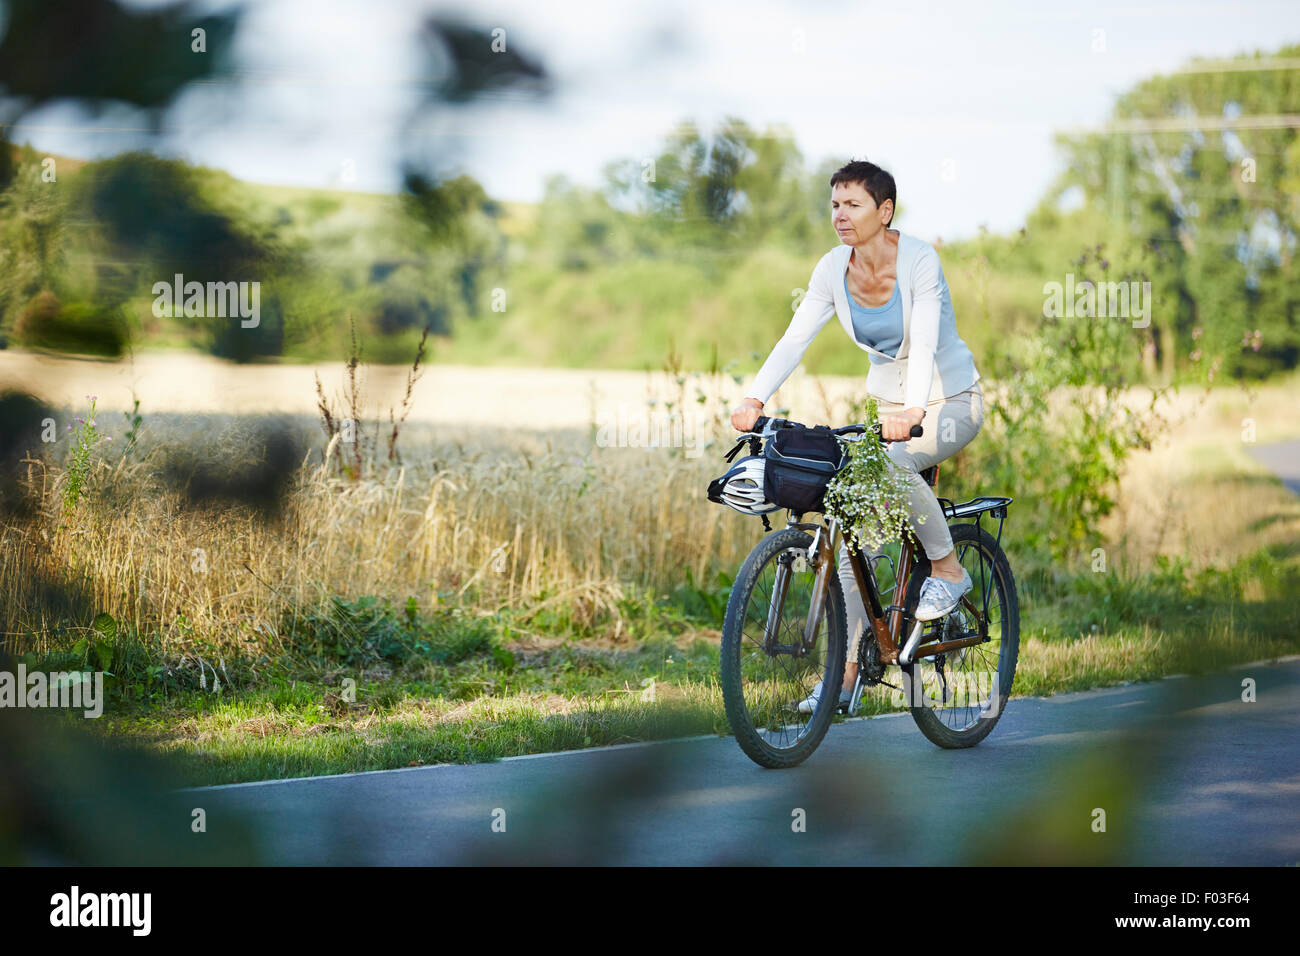 Old woman riding her bike on a street in summer Stock Photo